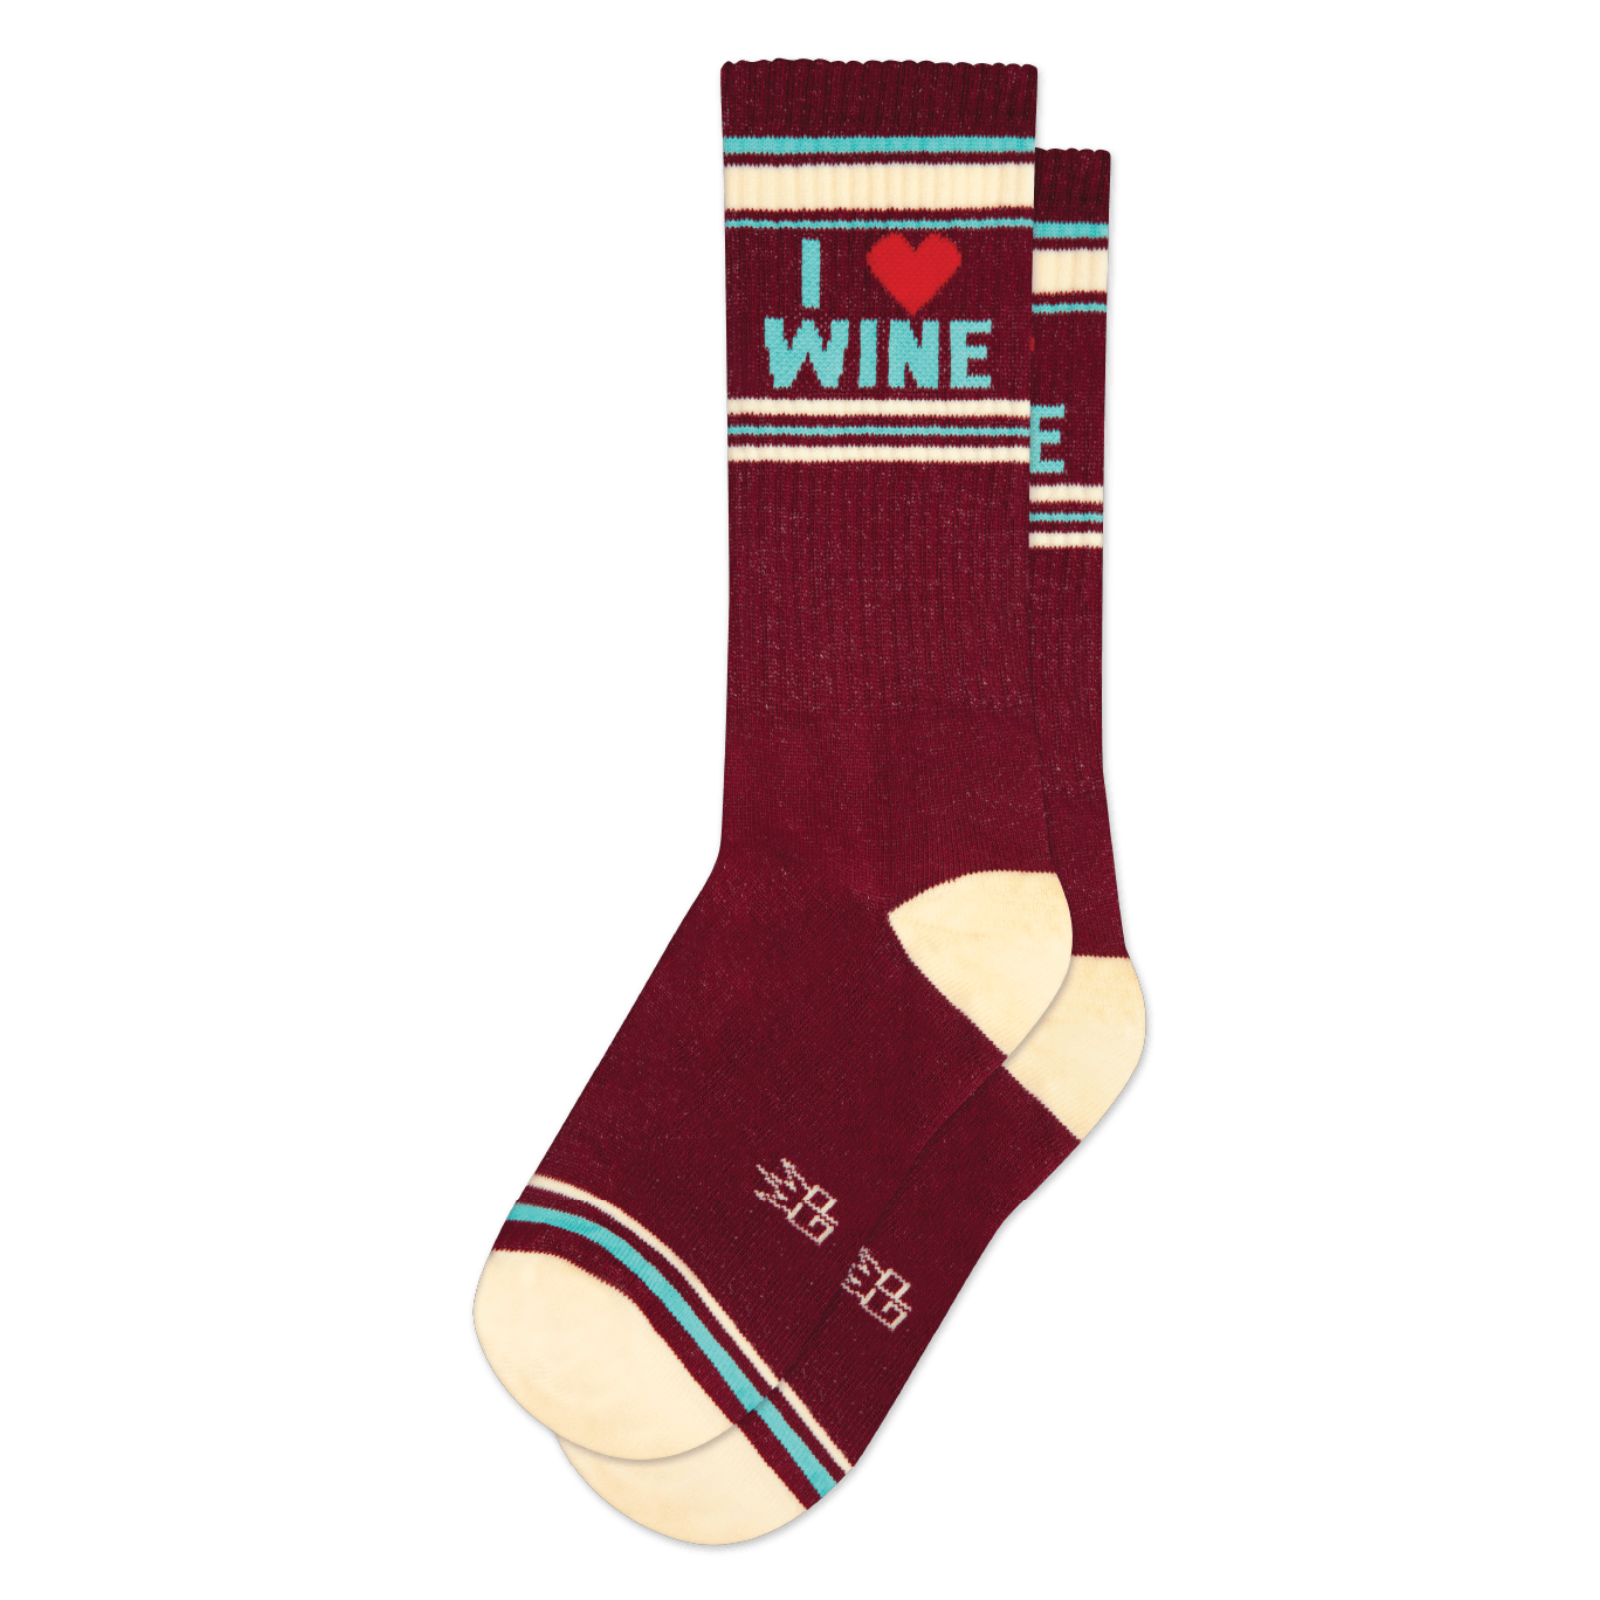 Gumball Poodle I Love Wine women's and men's sock featuring burgundy sock with I (heart symbol) Wine 